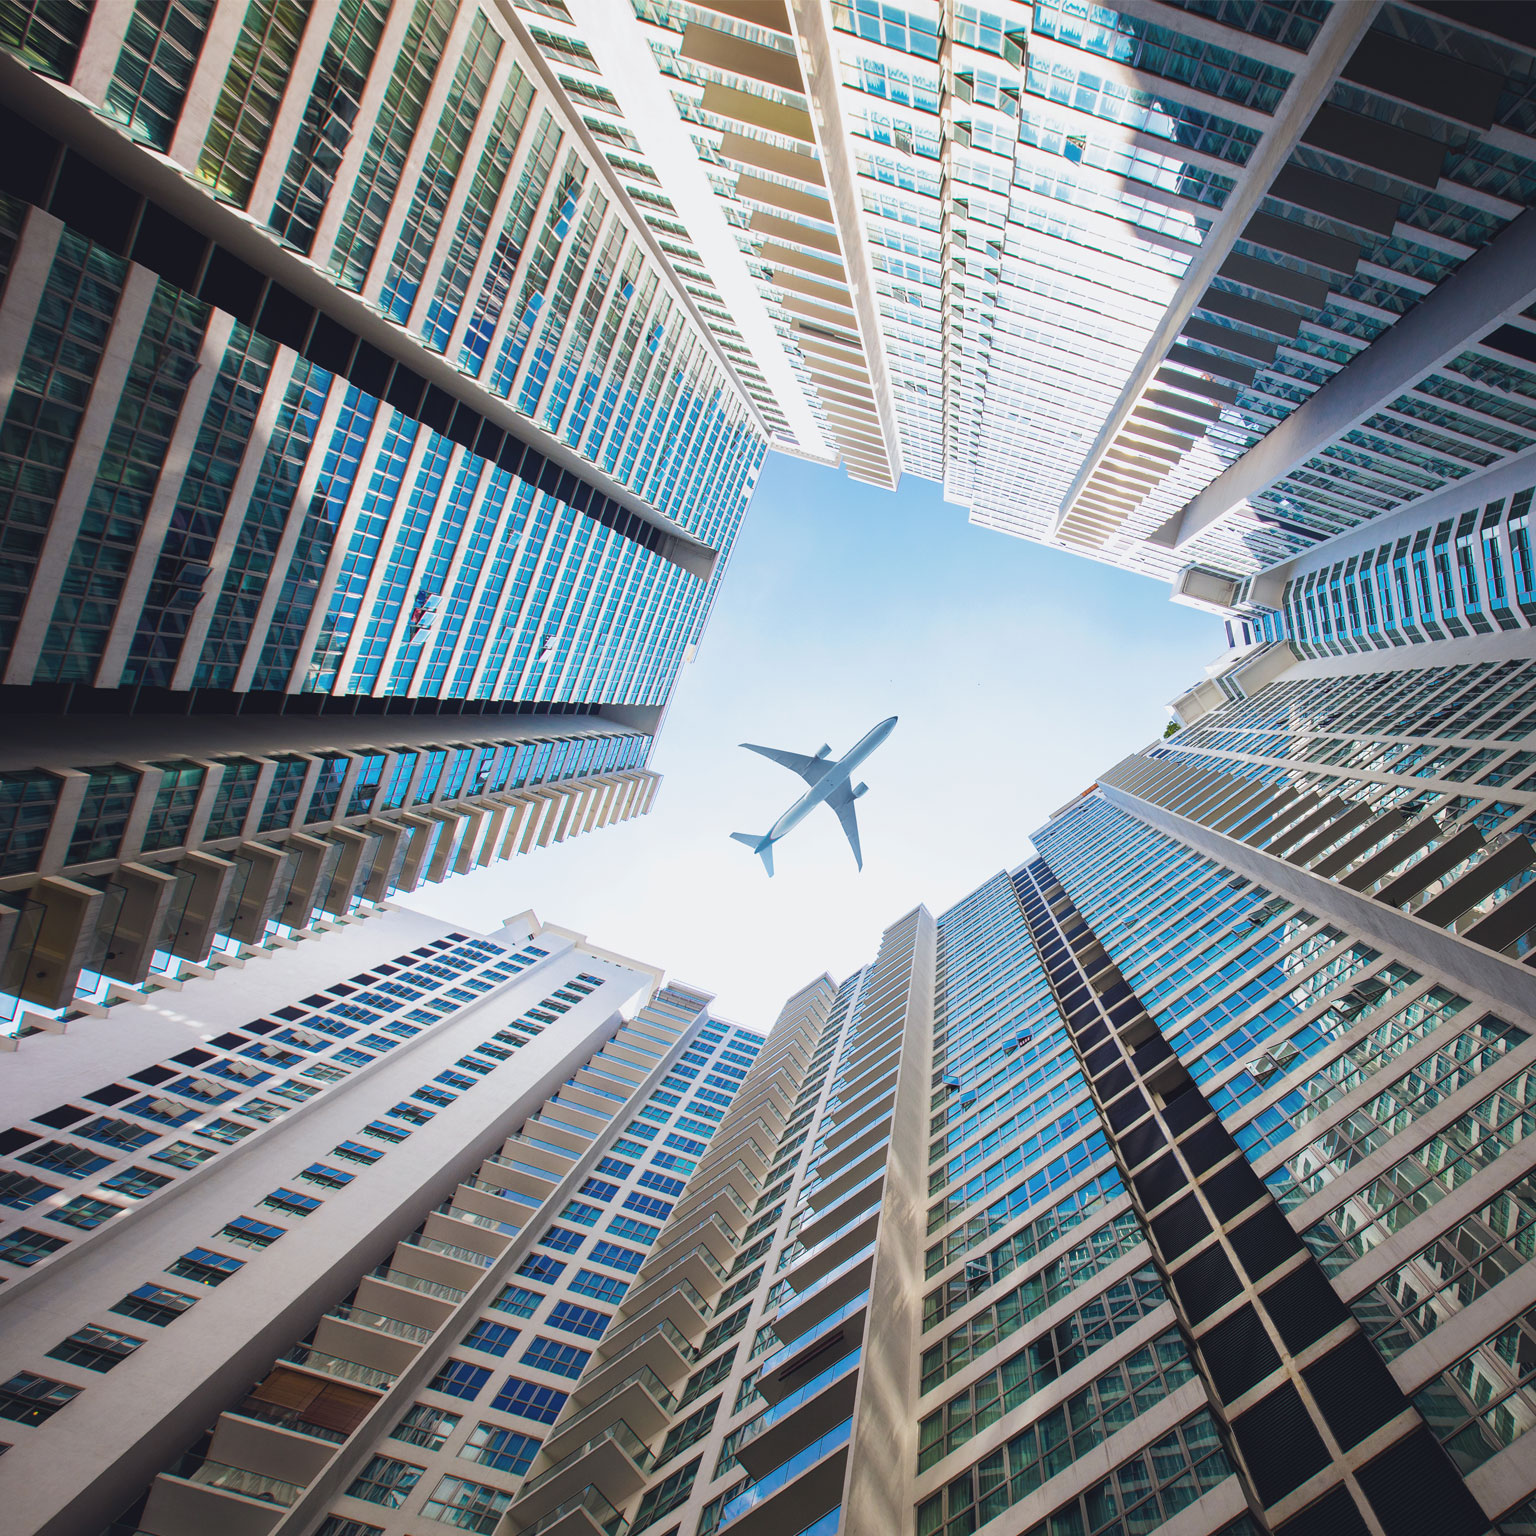 what global perspectives on air travel can you think of